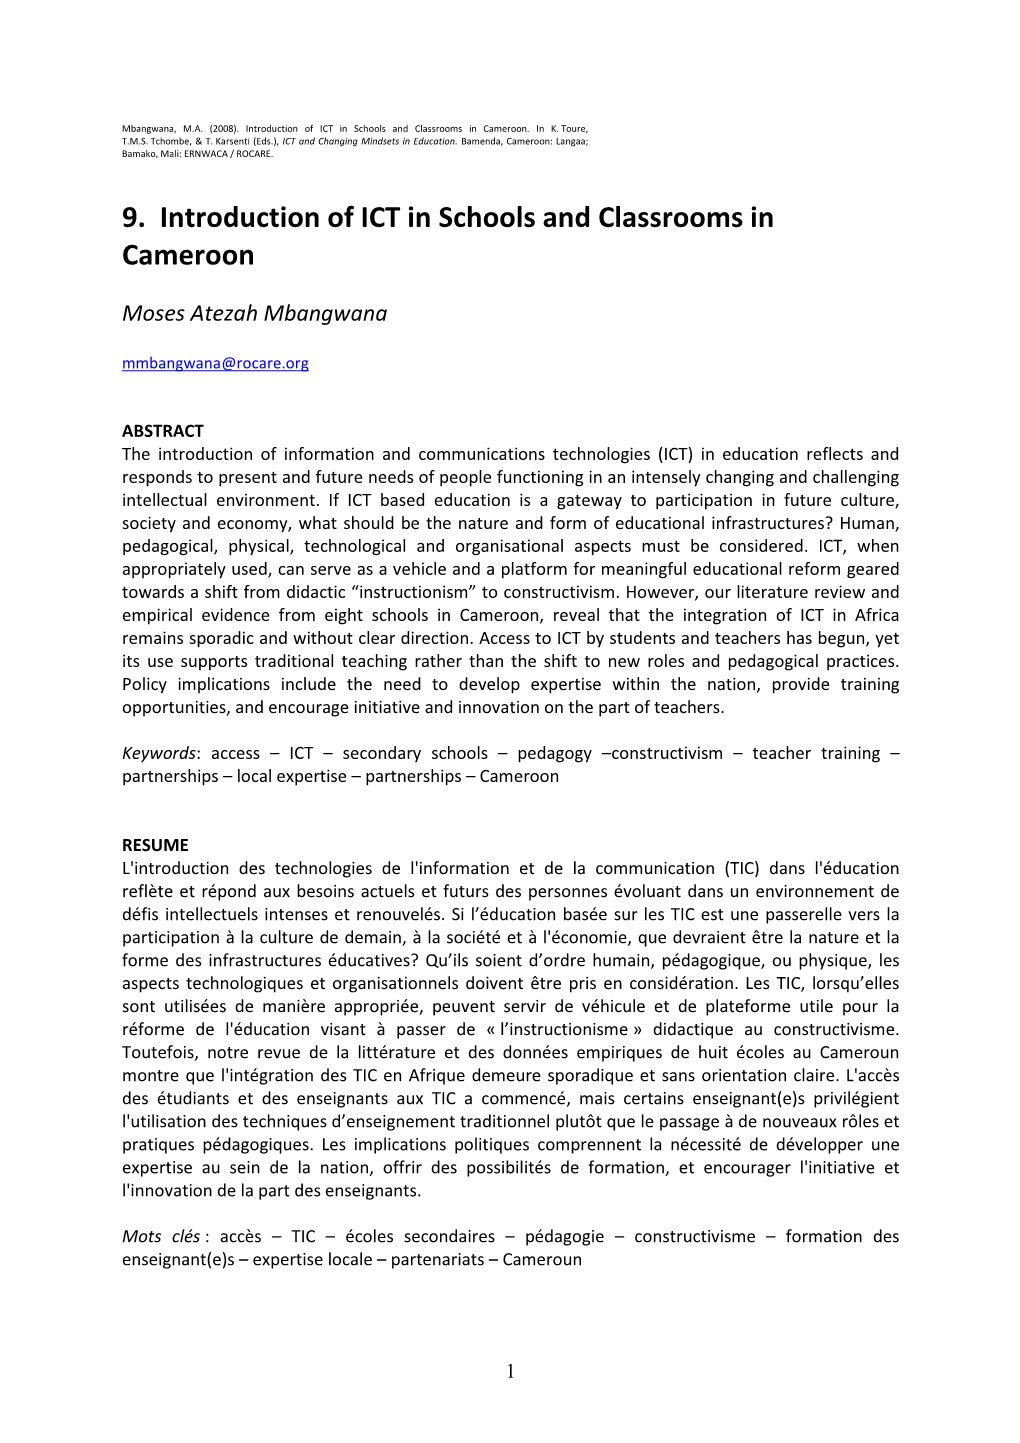 9. Introduction of ICT in Schools and Classrooms in Cameroon